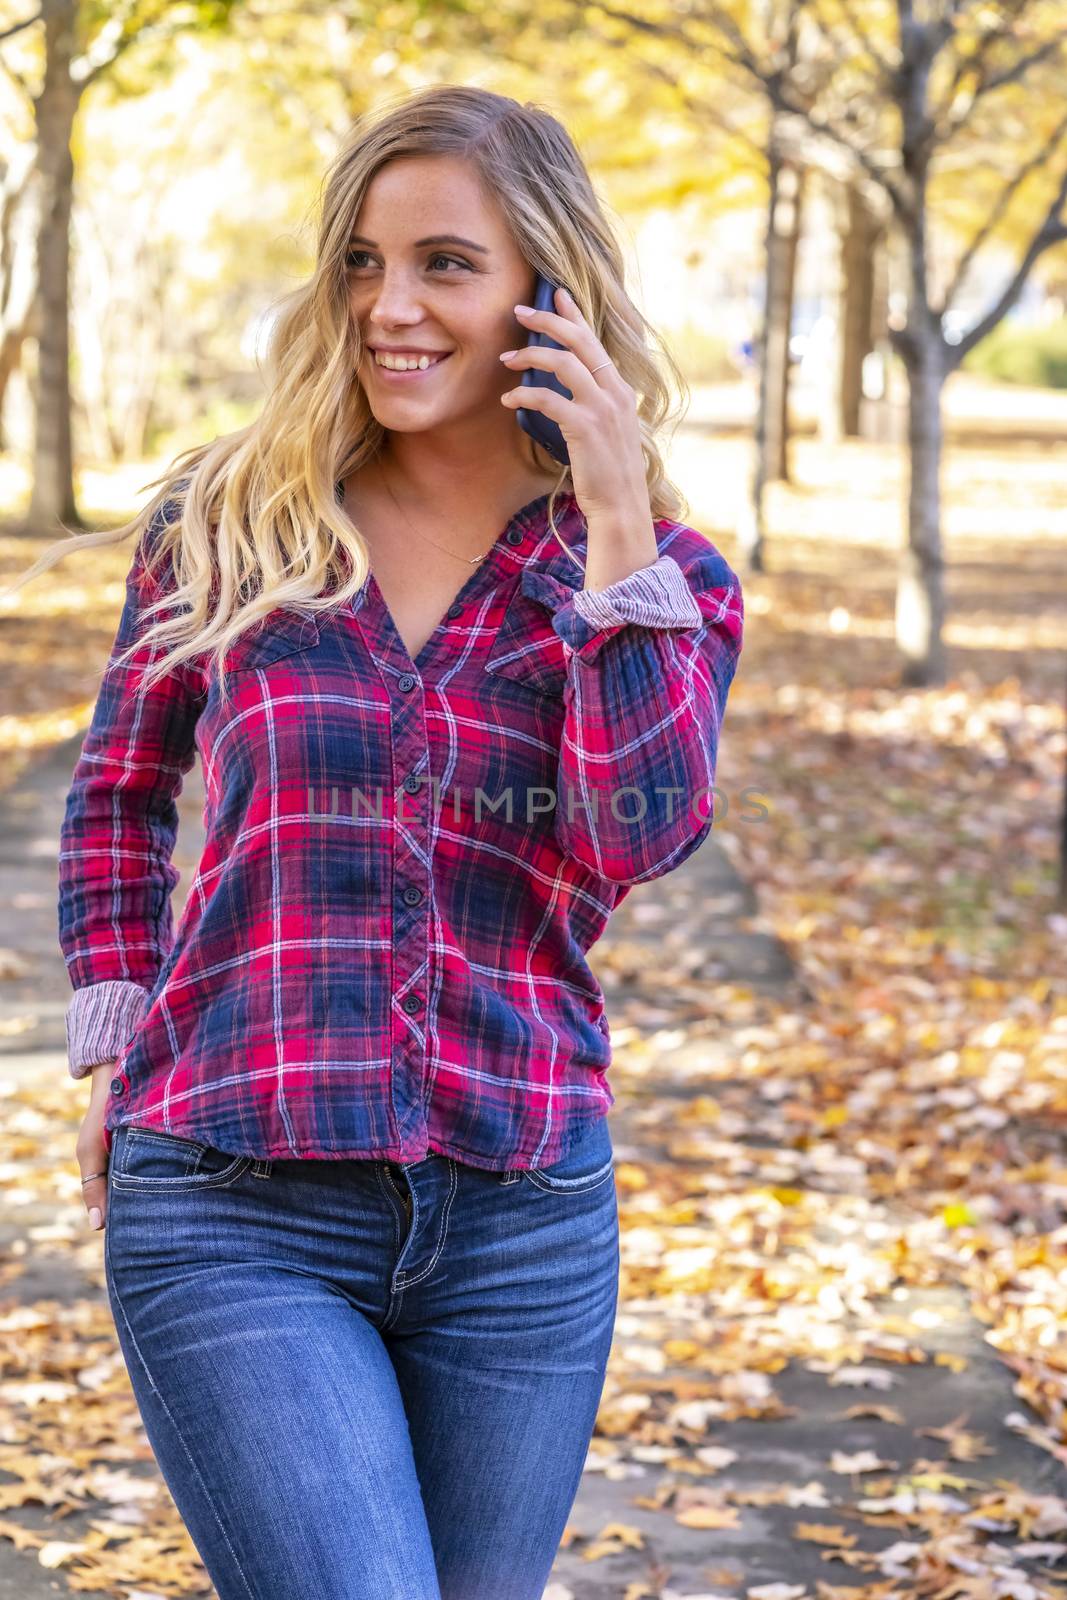 A Lovely Blonde Talks On Her Mobile Device On An Autumn Day Outdoors At The Park by actionsports